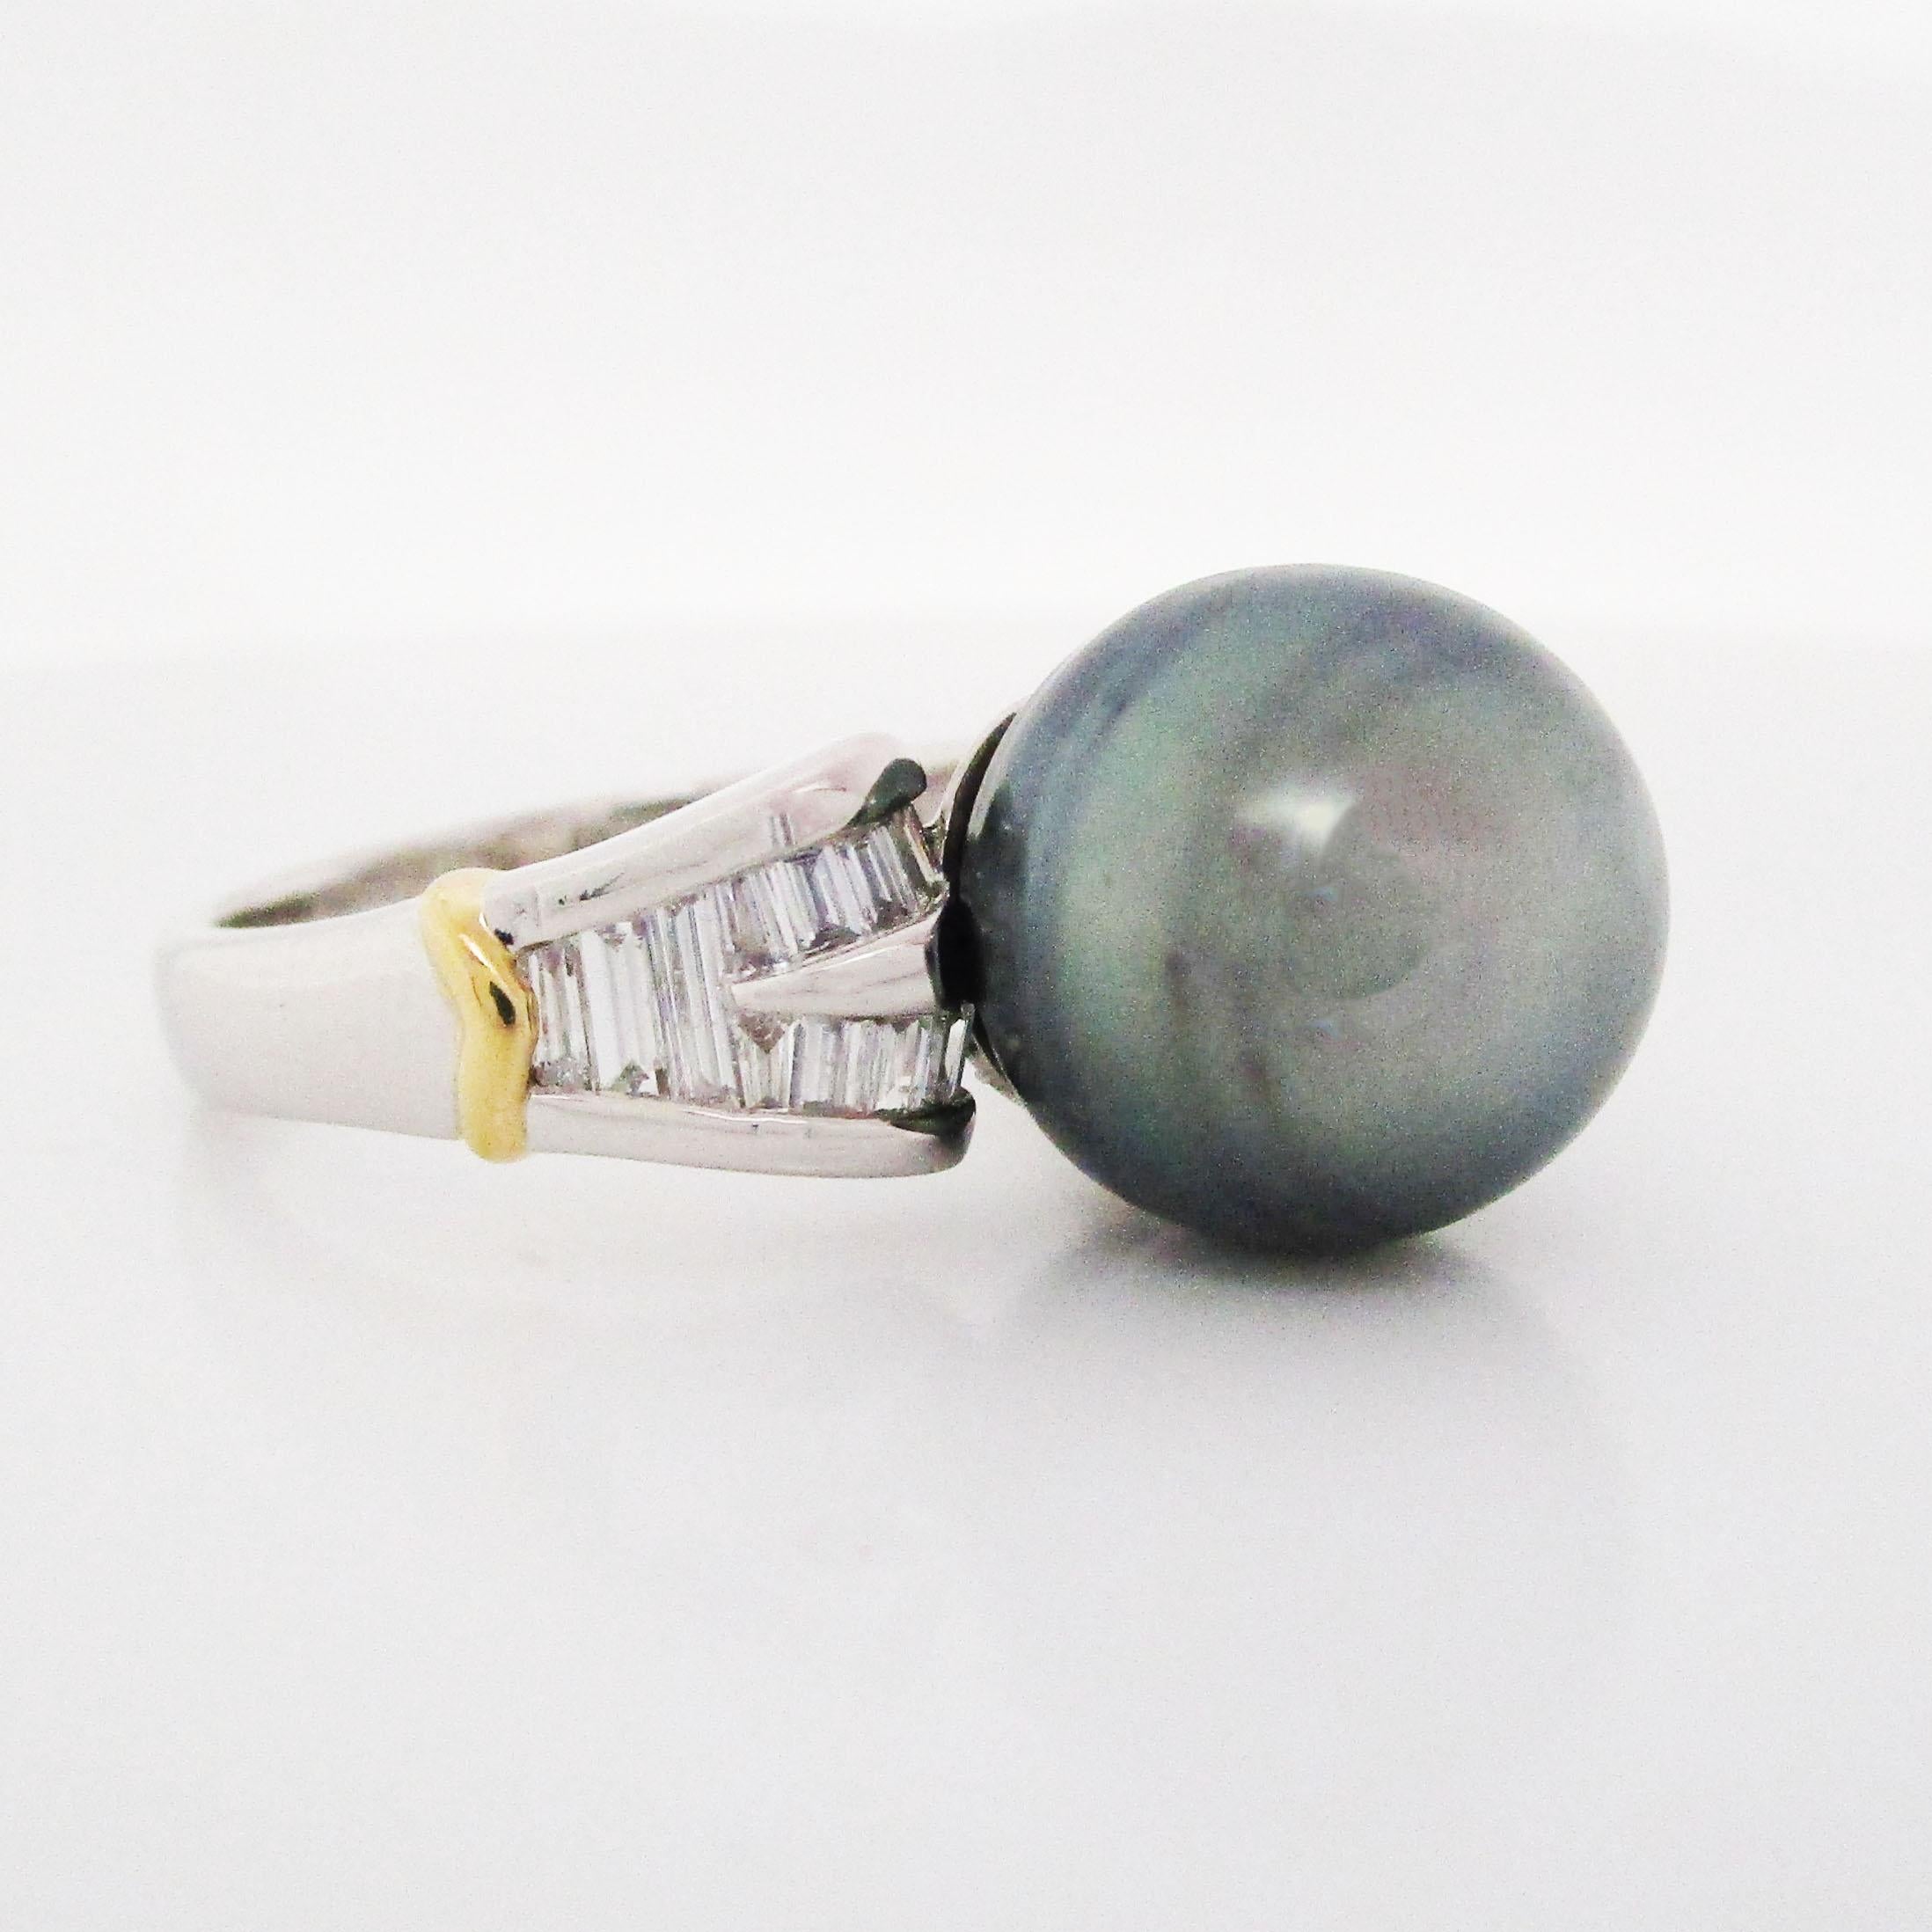 This platinum ring boasts a stunning array of white baguette diamonds framing an absolutely jaw-dropping 12mm Tahitian pearl center! The shoulders of the ring have a yellow gold accent that provides the perfect complement for the brilliant white